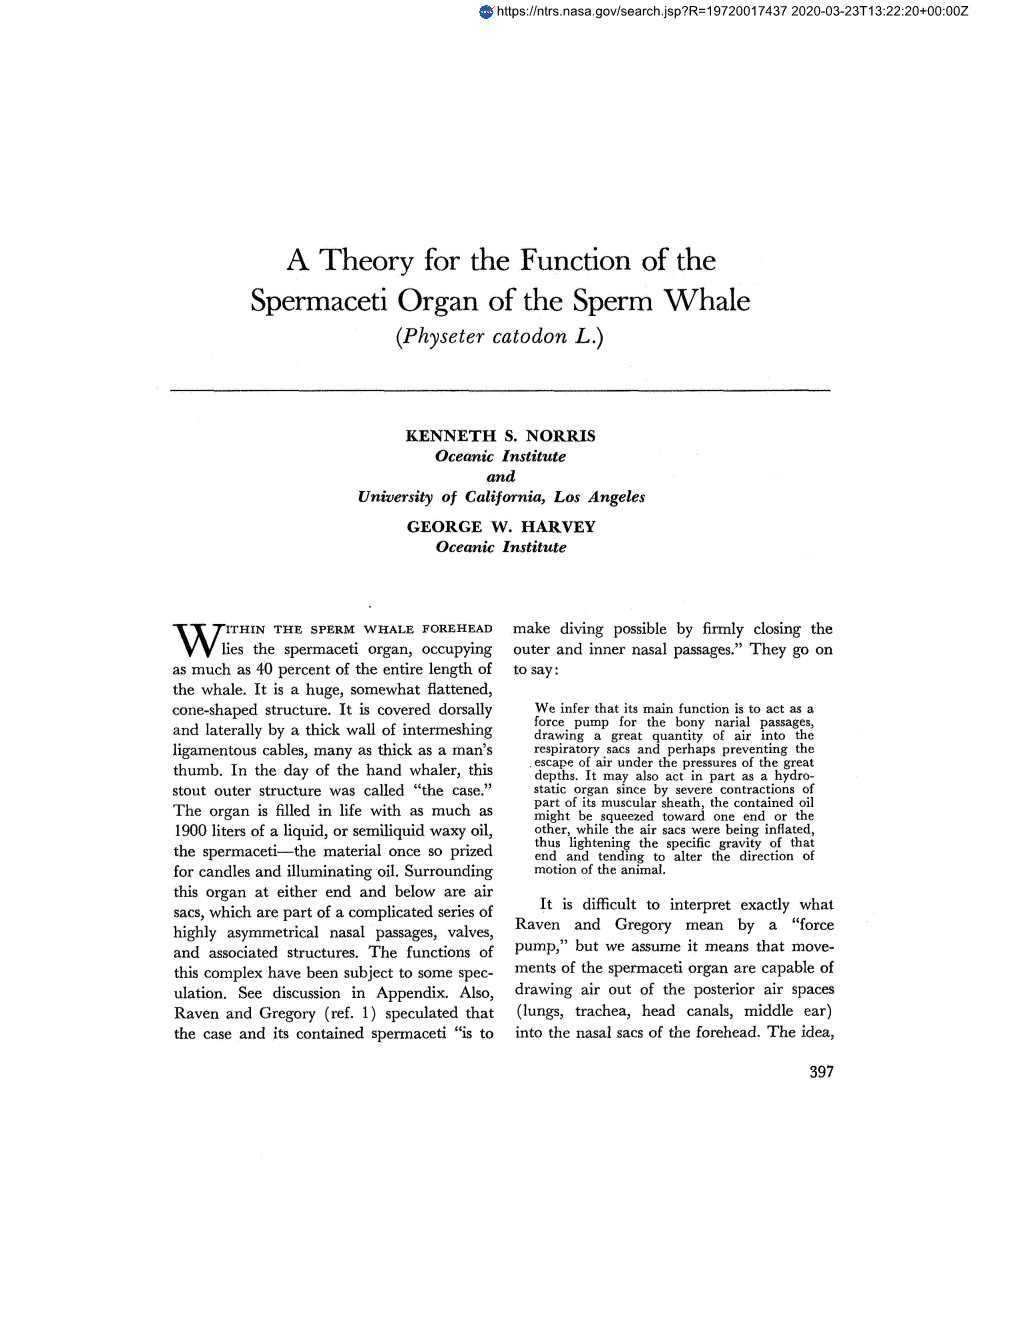 A Theory for the Function of the Spermaceti Organ of the Sperm Whale (Physeter Catodon L.)